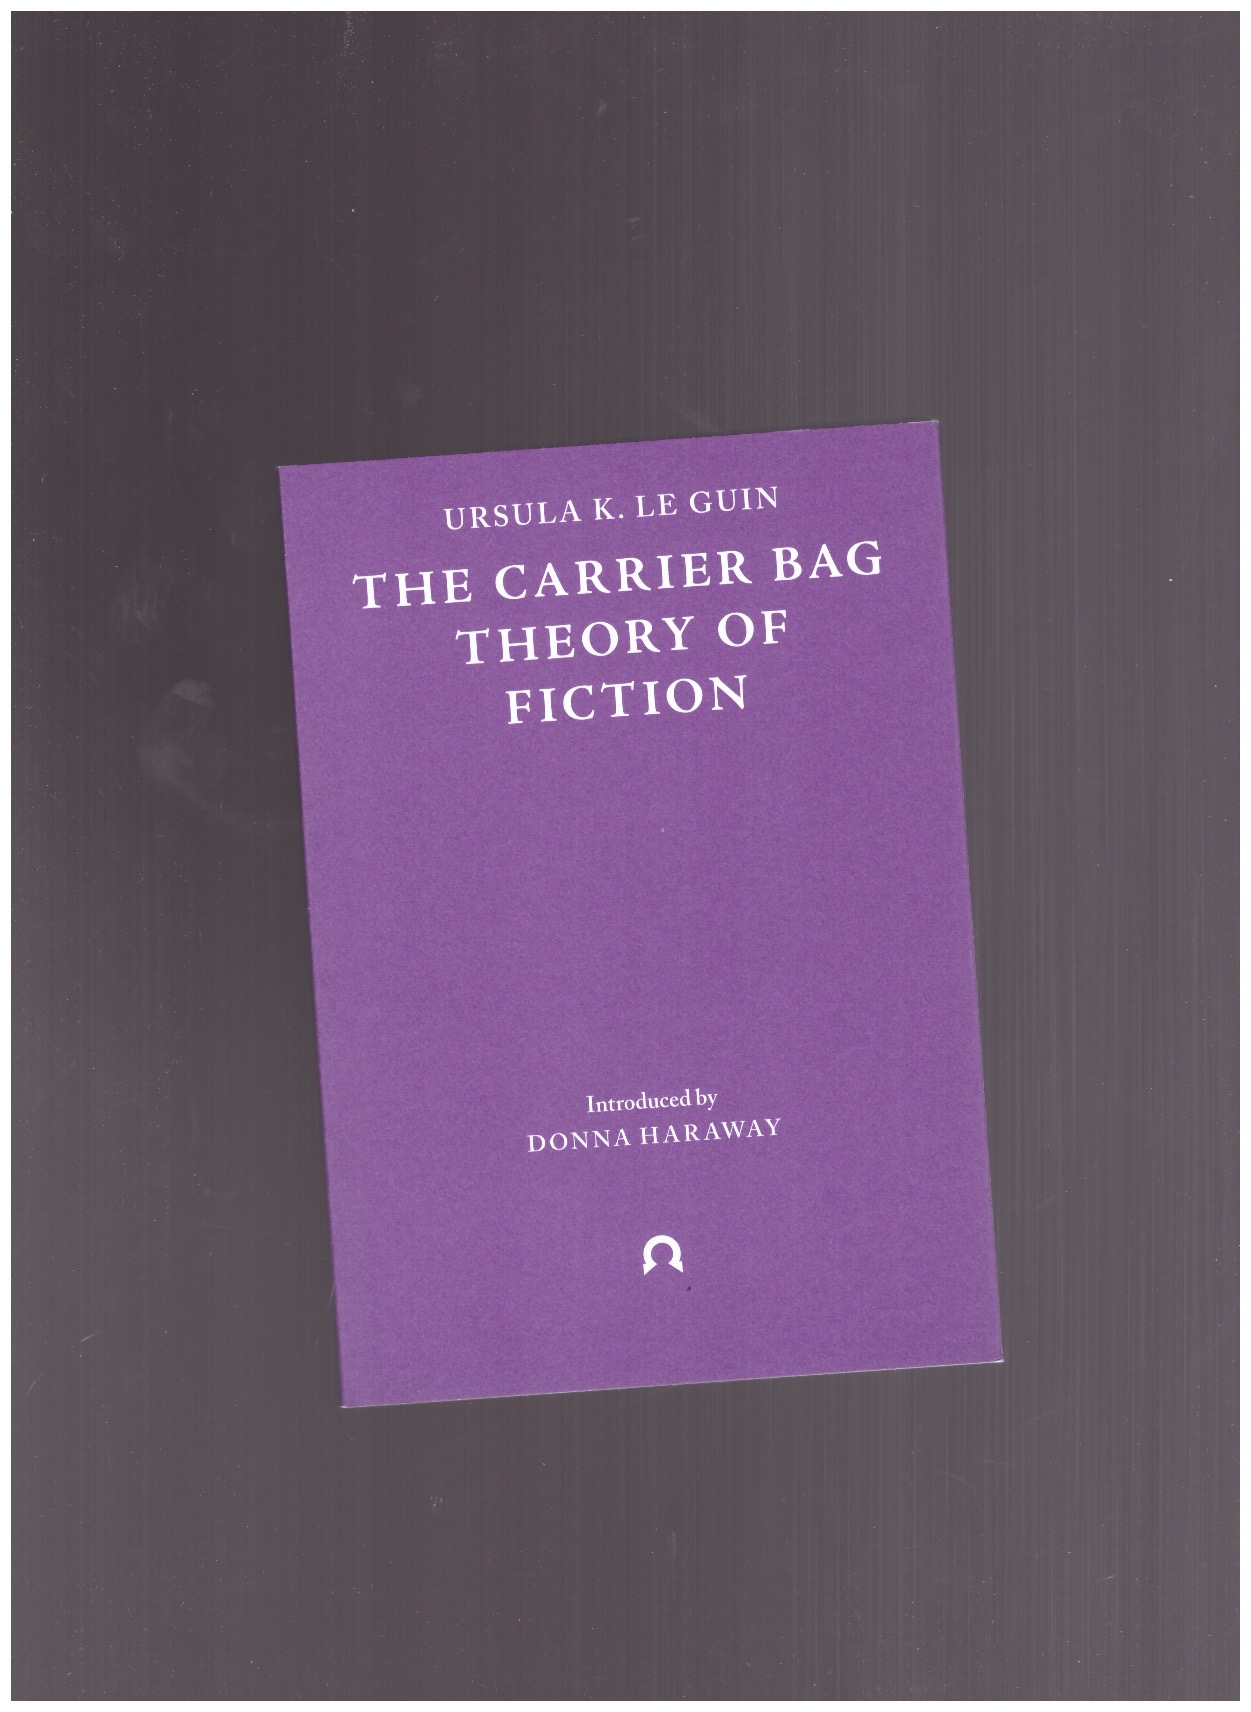 LE GUIN, Ursula K. - The Carrier Bag Theory of Fiction